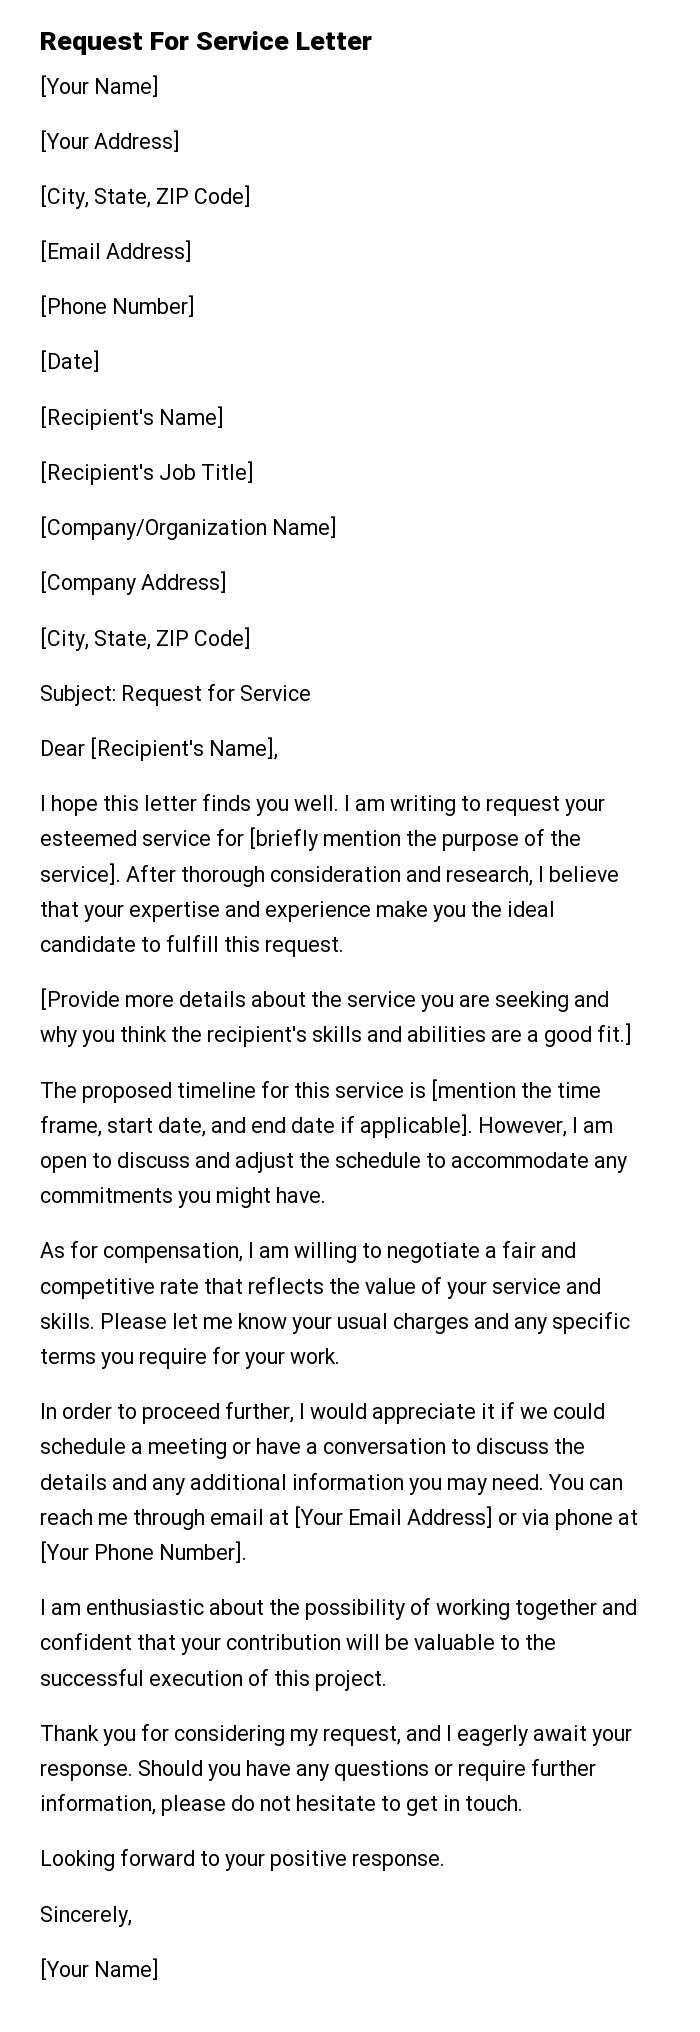 Request For Service Letter